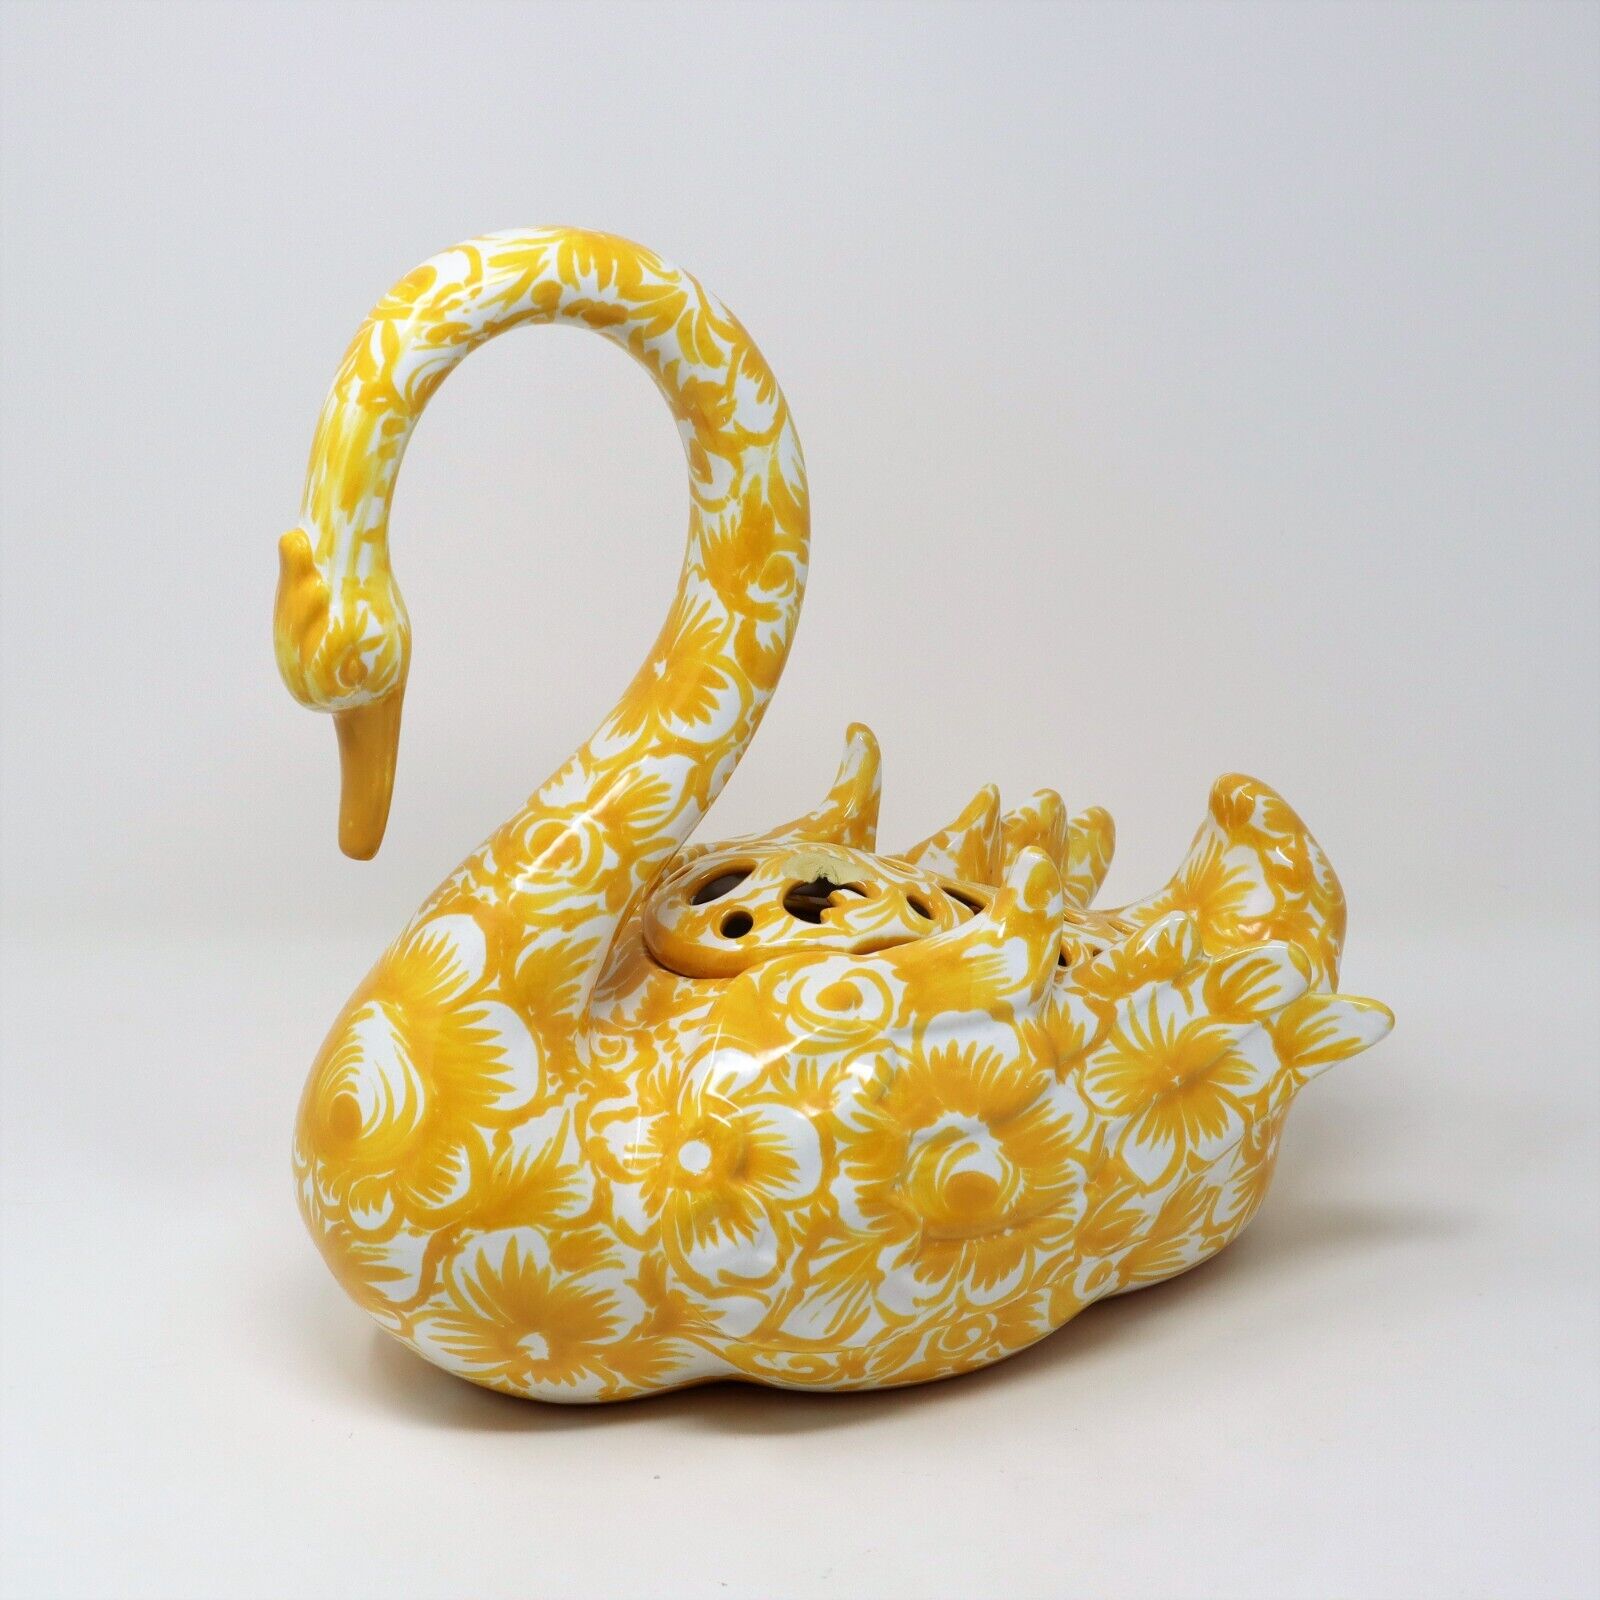 Large Portugal Swan Planter Porcelain Yellow Flowers Floral